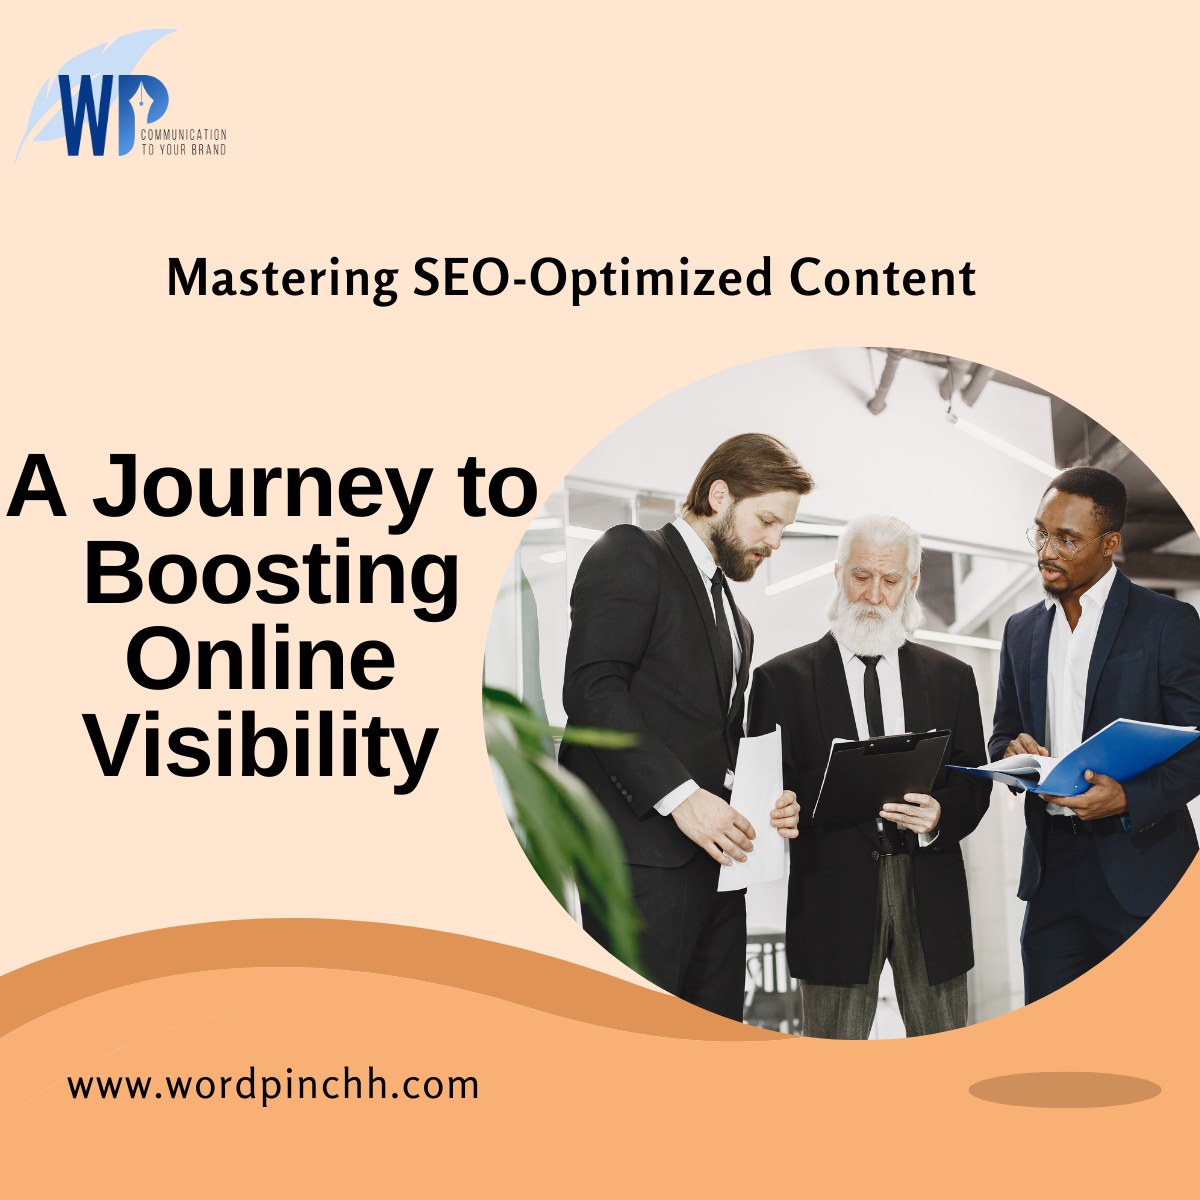 Mastering SEO-Optimized Content: A Journey to Boosting Online Visibility